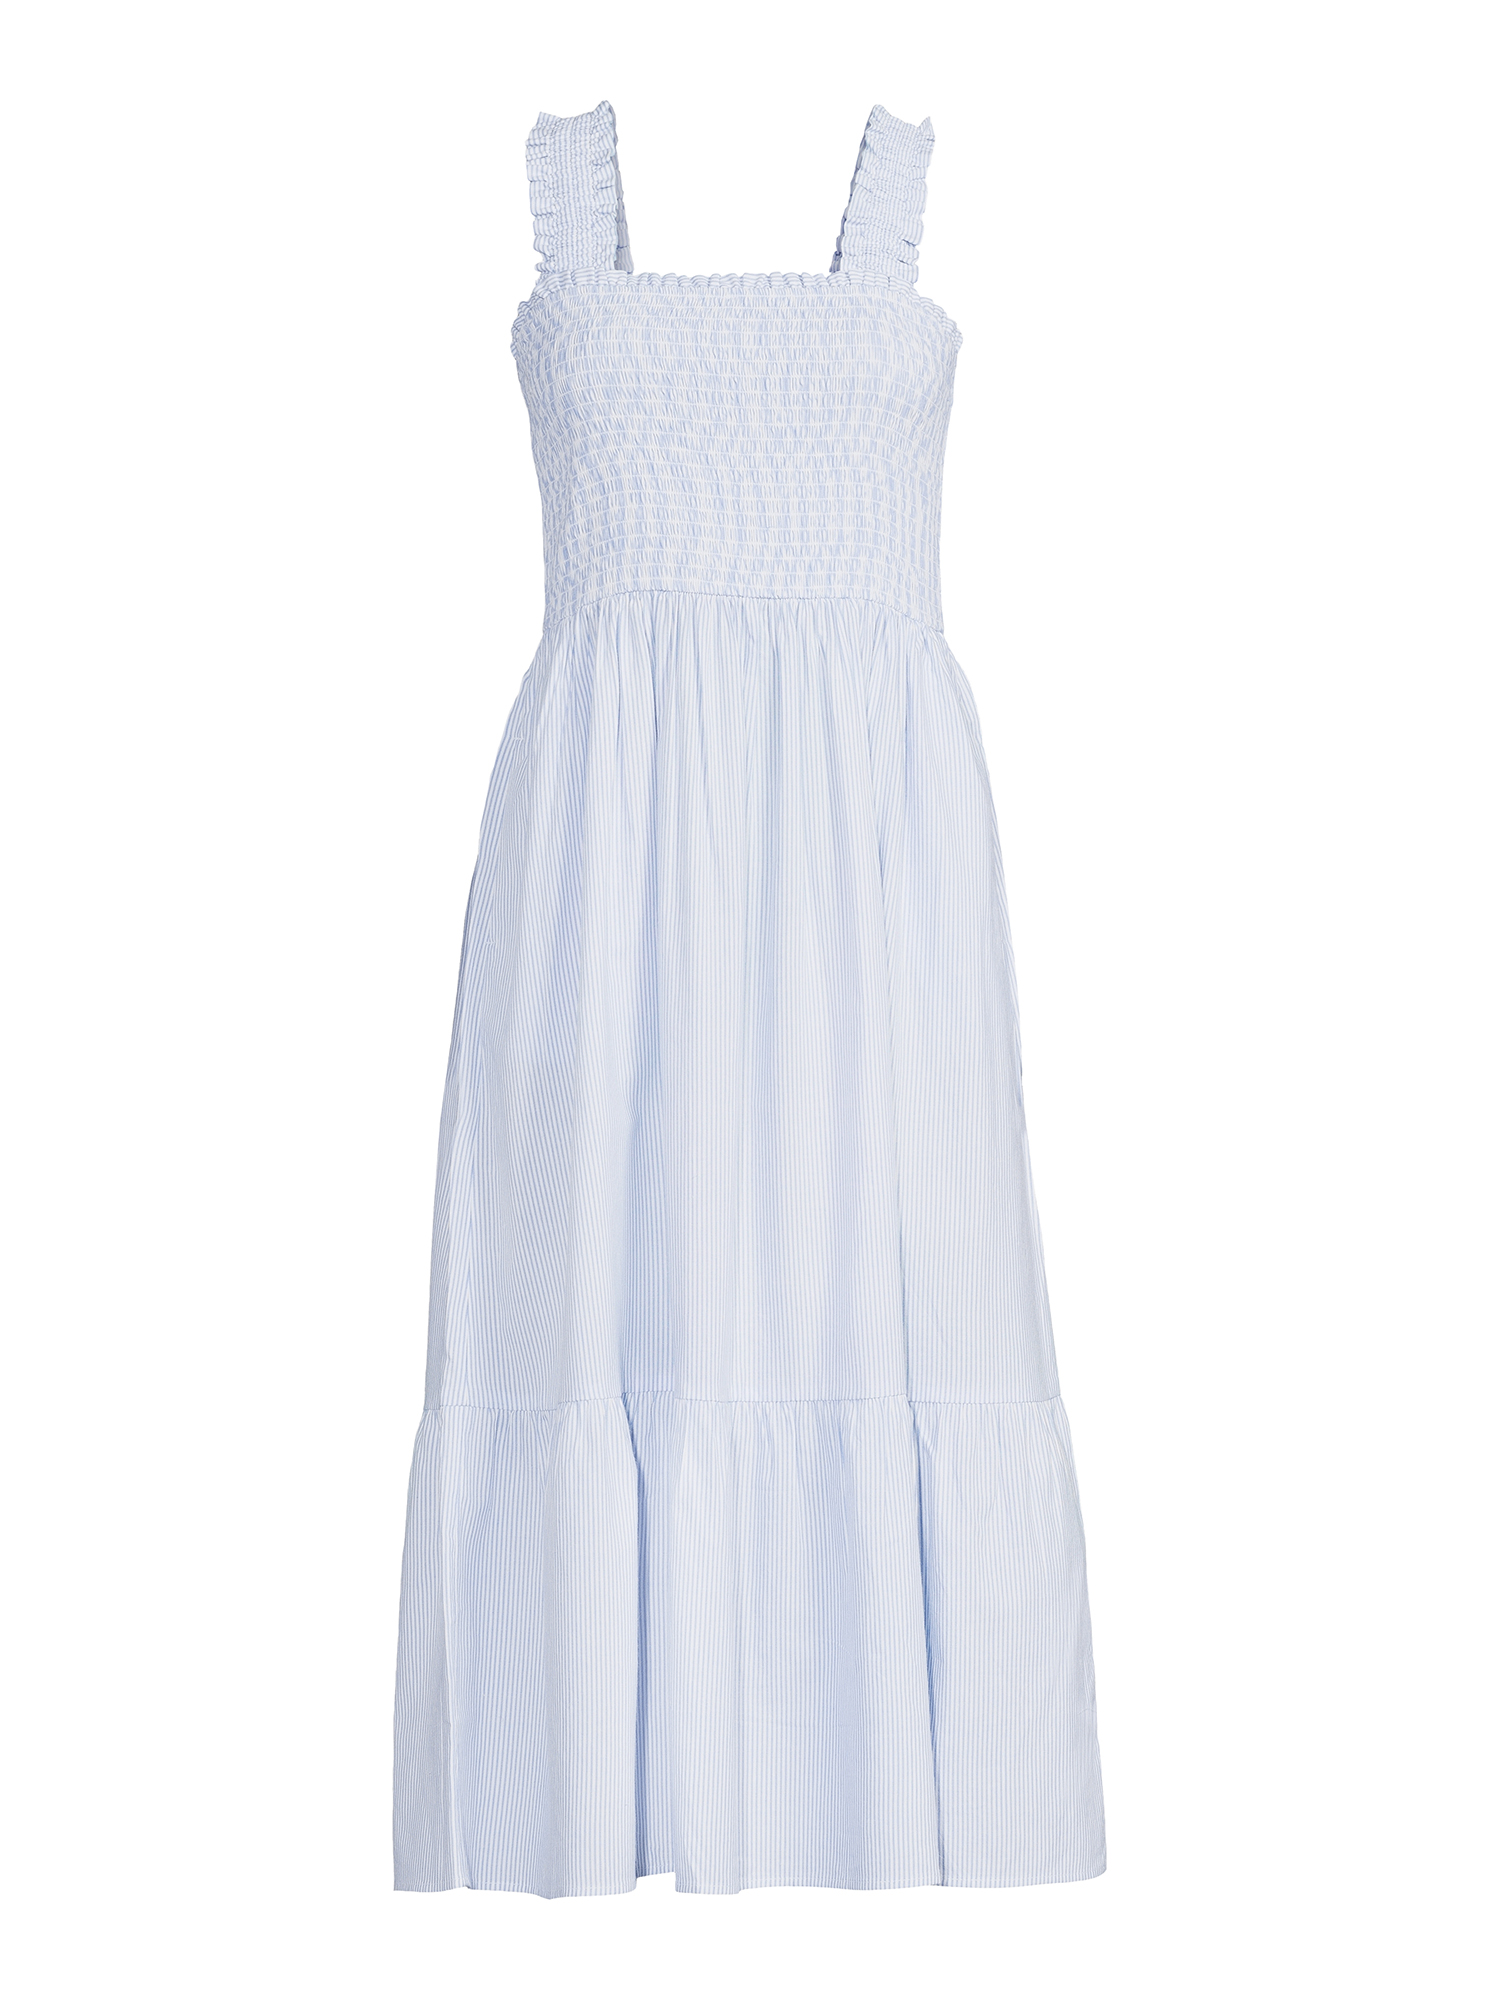 Time and Tru Women's Smocked Midi Dress with Ruffle Straps - image 5 of 5